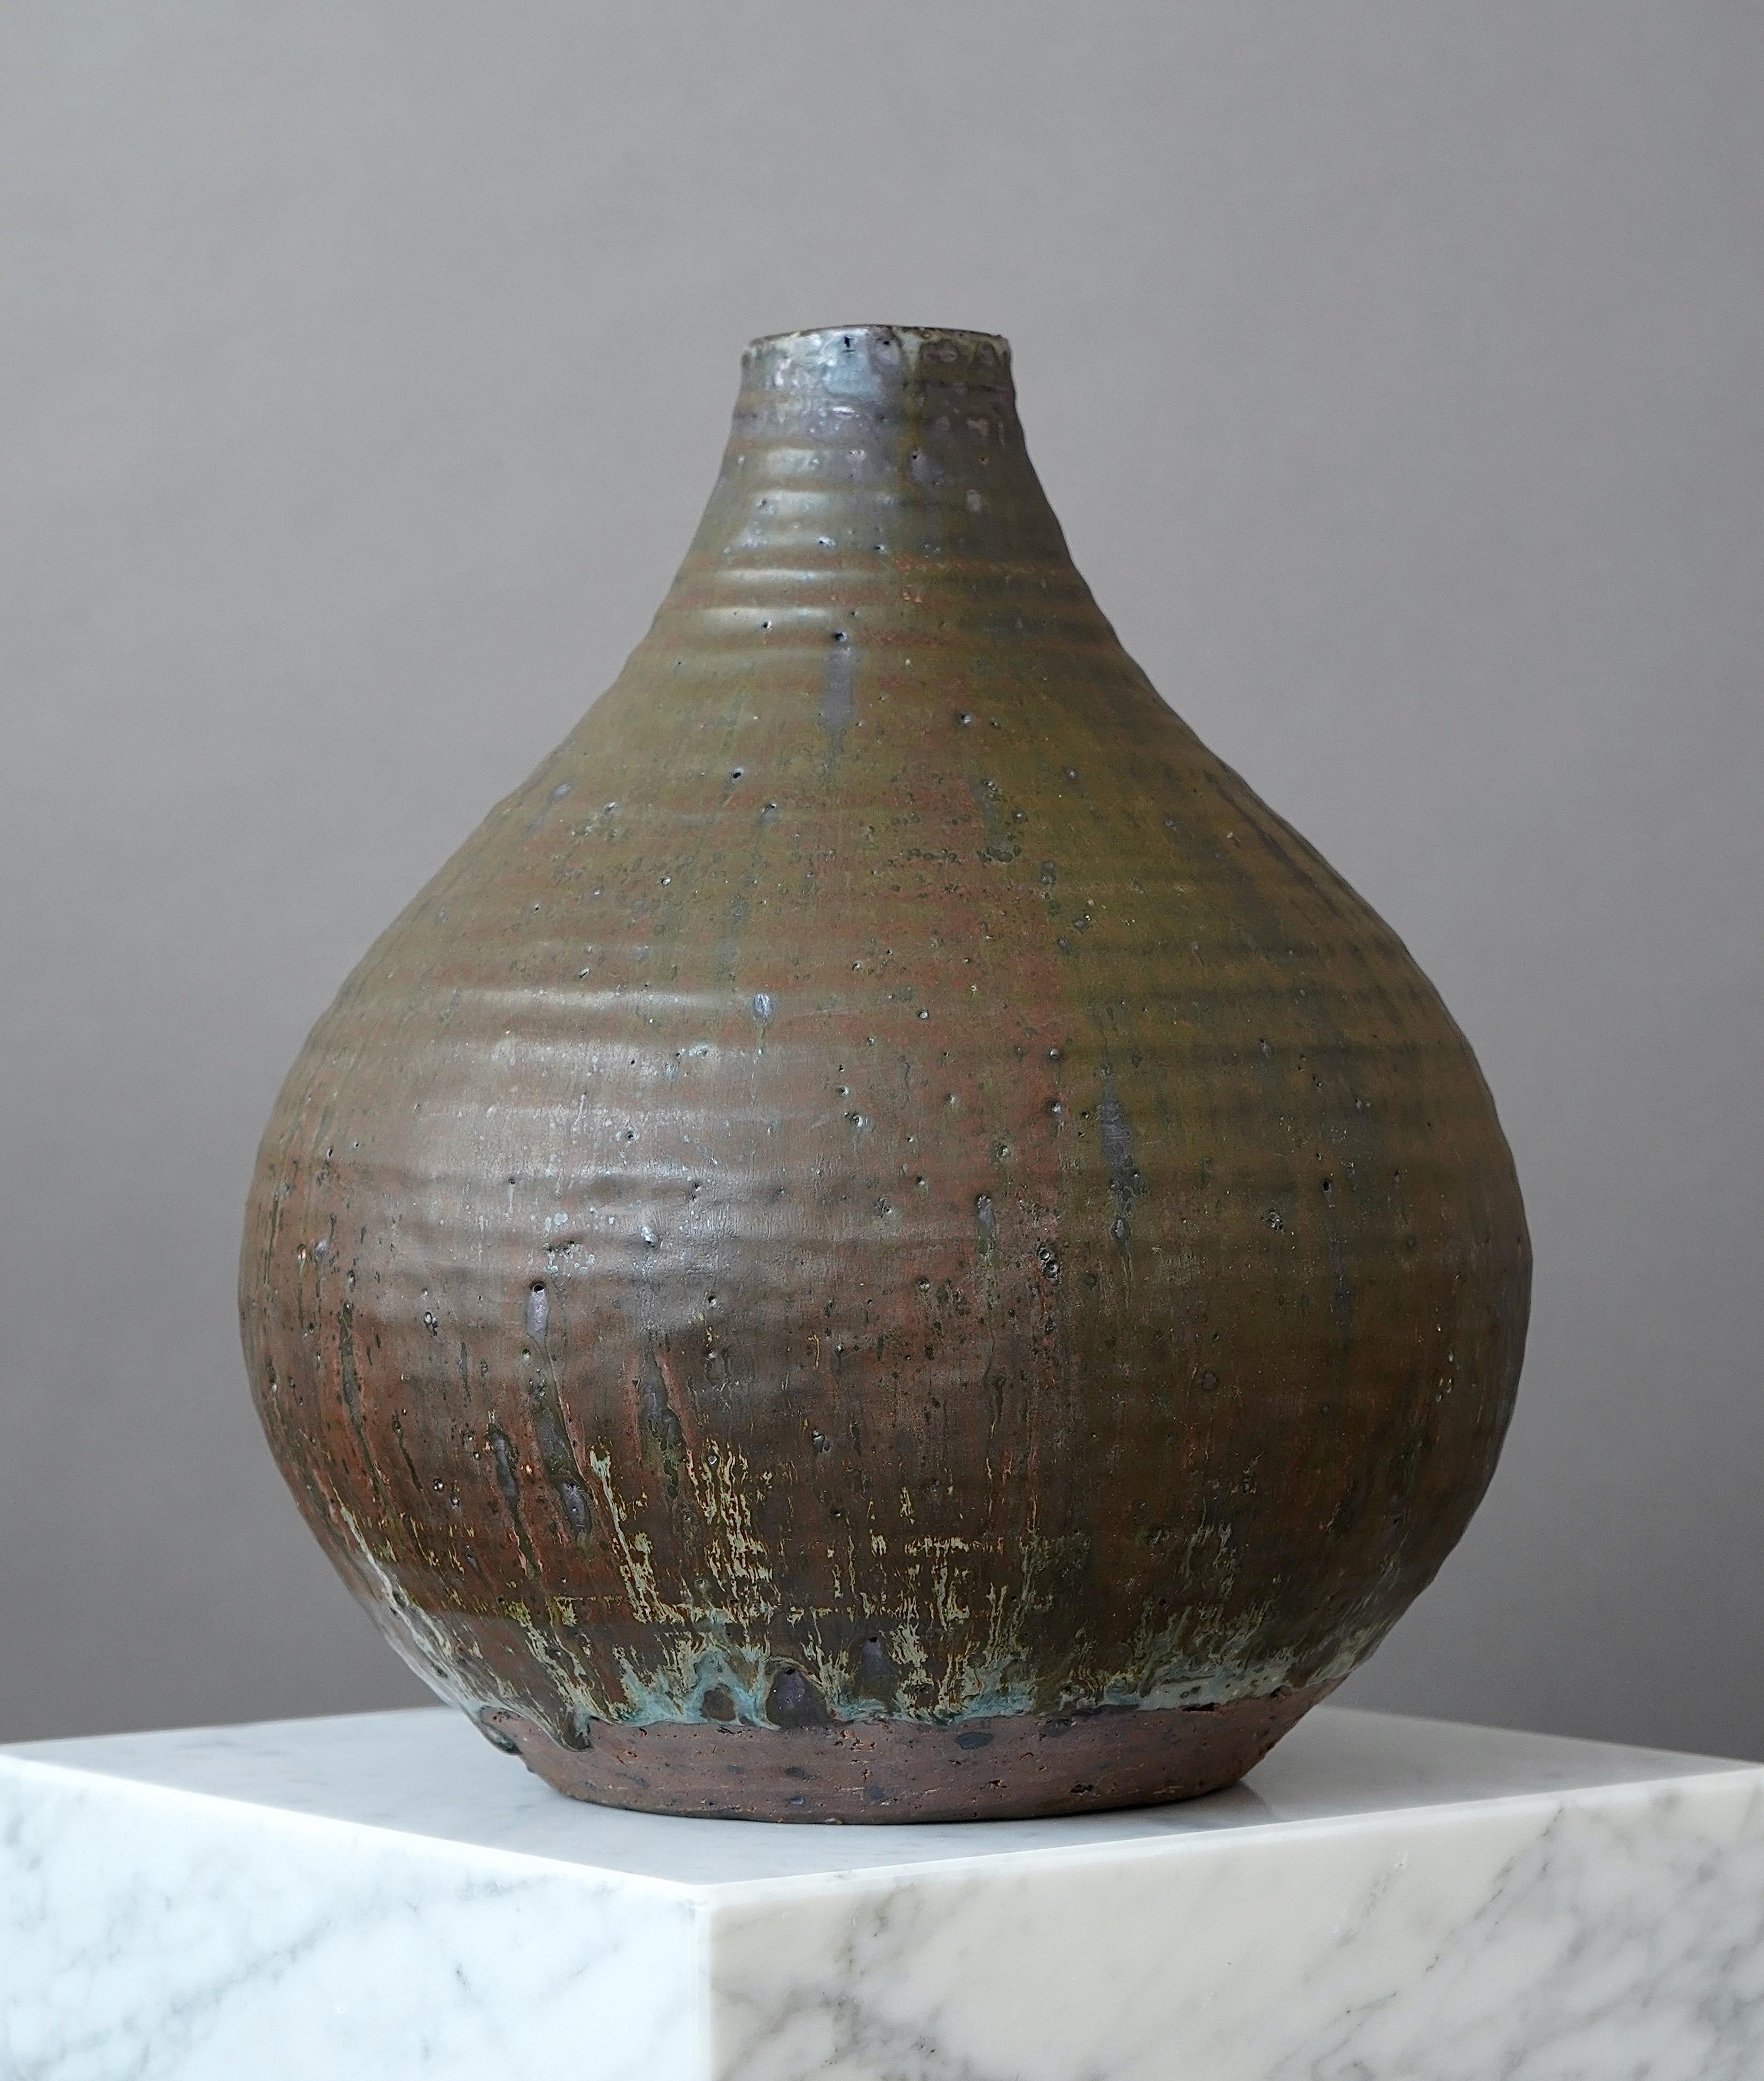 A beautiful and unique stoneware vase with amazing glaze. 
Made by Rolf Palm, in the artist's studio, Mölle, Sweden, 1964.

It's large, weighs 7,7 kg.

Excellent condition. Incised ’Palm / Mölle / 1964’.

Rolf Palm (1930–2018) was one of Sweden’s